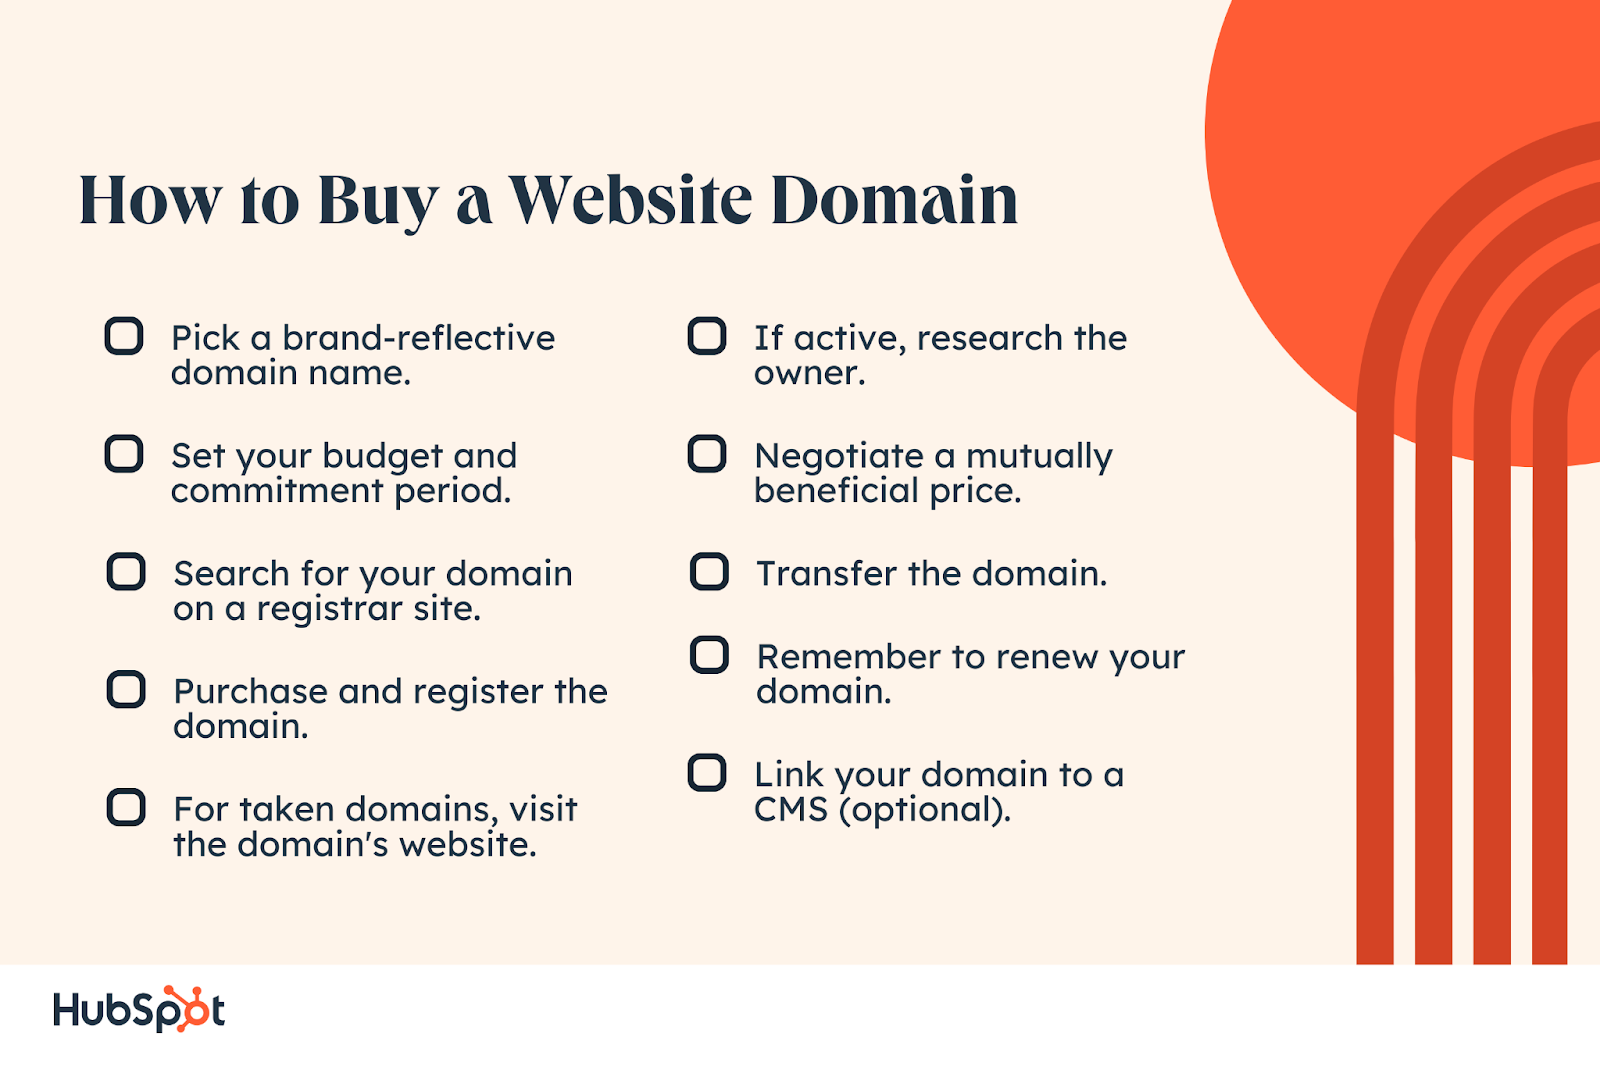 How to Buy a Website Domain. Pick a brand-reflective domain name. Set your budget and commitment period. Search for your domain on a registrar site. Purchase and register the domain. For taken domains, visit the domain's website. If active, research the owner. Negotiate a mutually beneficial price. Transfer the domain. Remember to renew your domain. Link your domain to a CMS (optional).